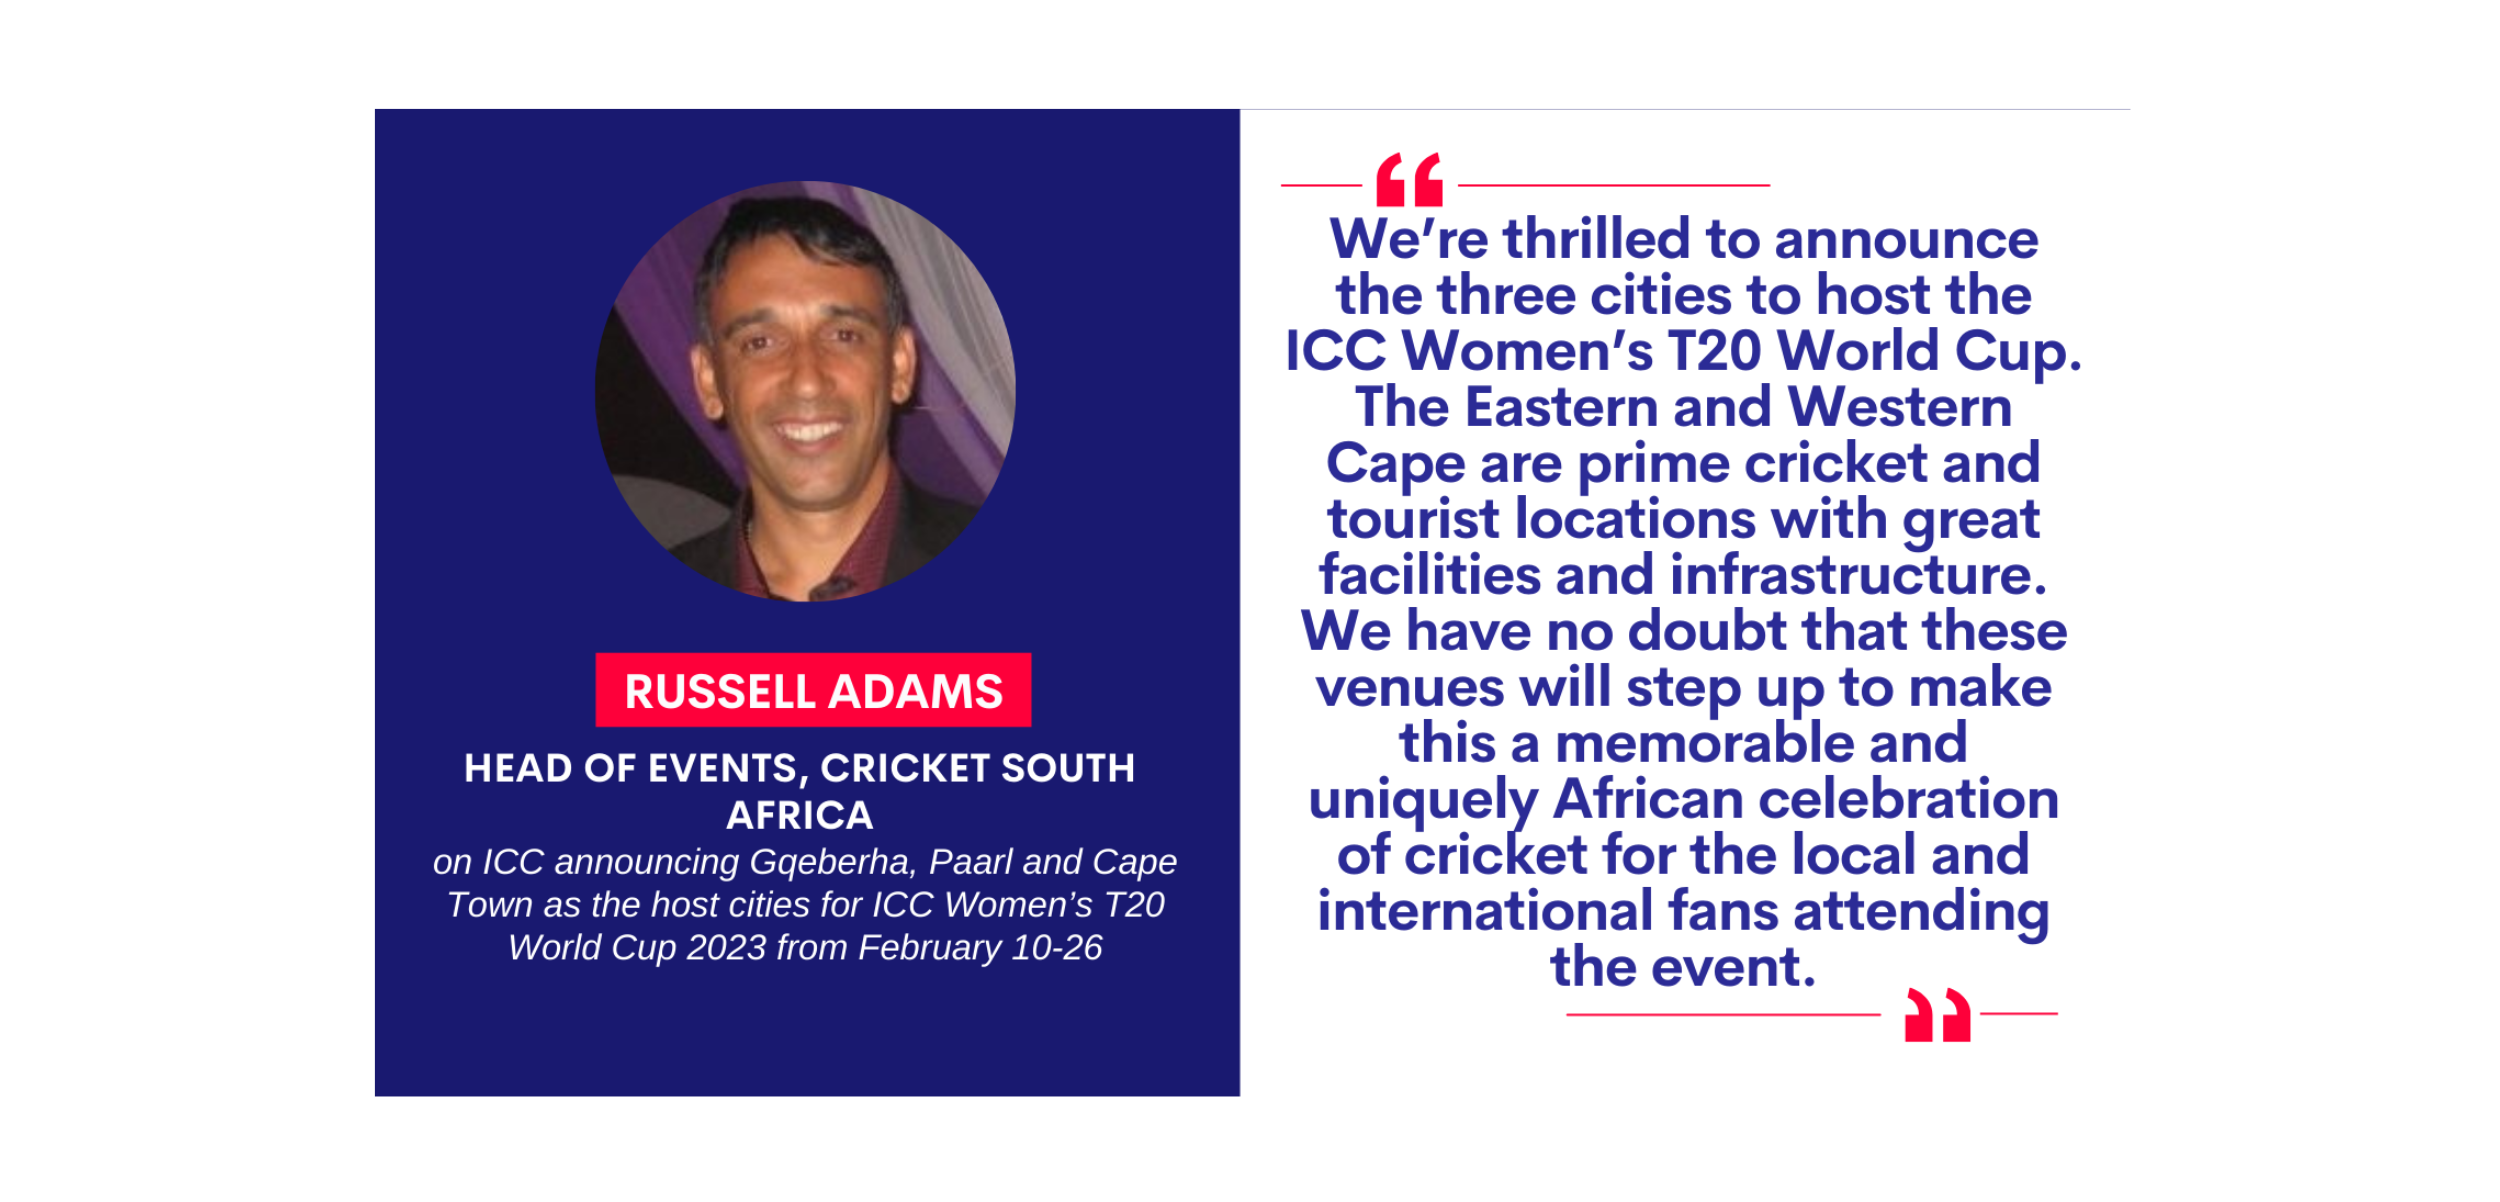 Russell Adams, Head of Events, Cricket South Africa on ICC announcing Gqeberha, Paarl and Cape Town as the host cities for ICC Women’s T20 World Cup 2023 from February 10-26